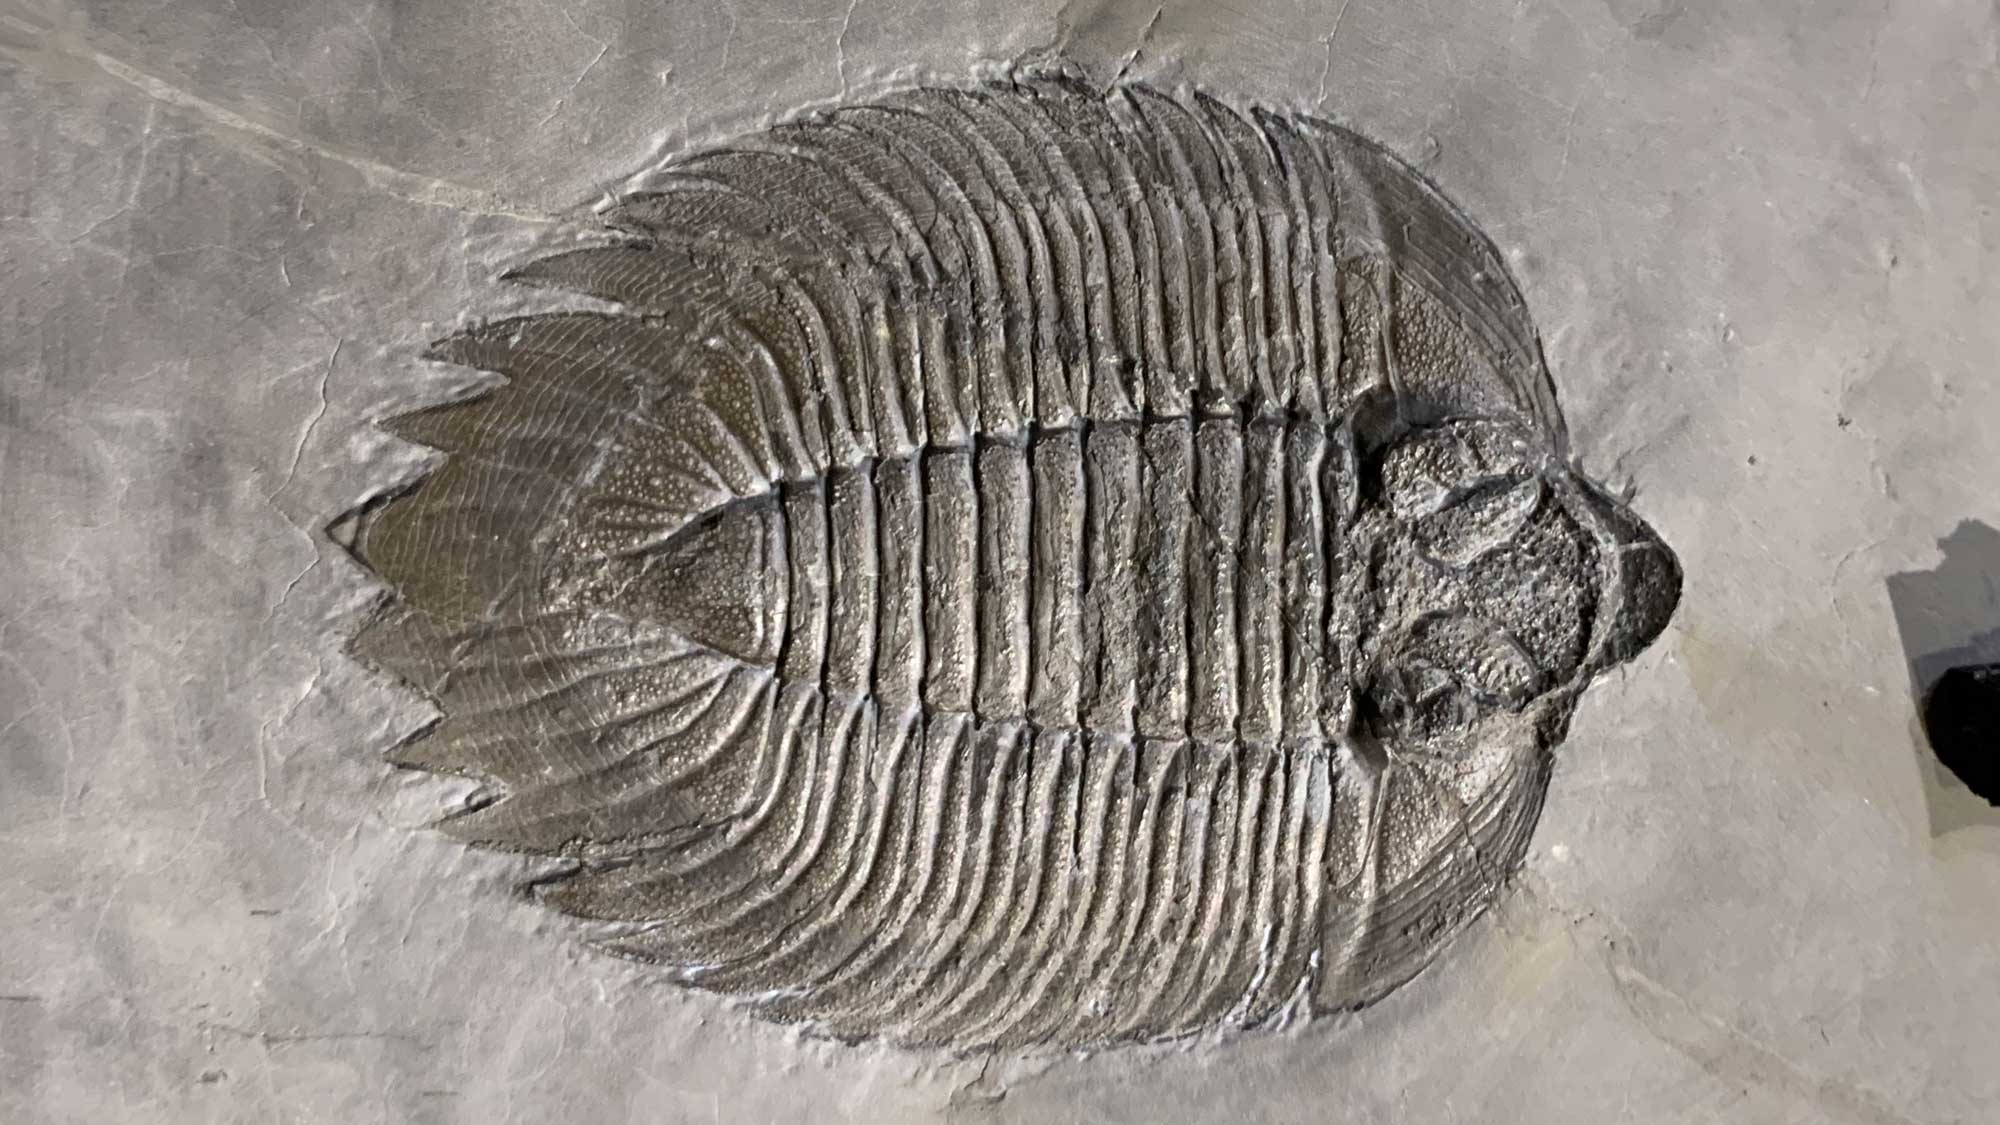 Photograph of a specimen of the trilobite Arctinurus boltoni on display at the Museum of the Earth in Ithaca, New York.